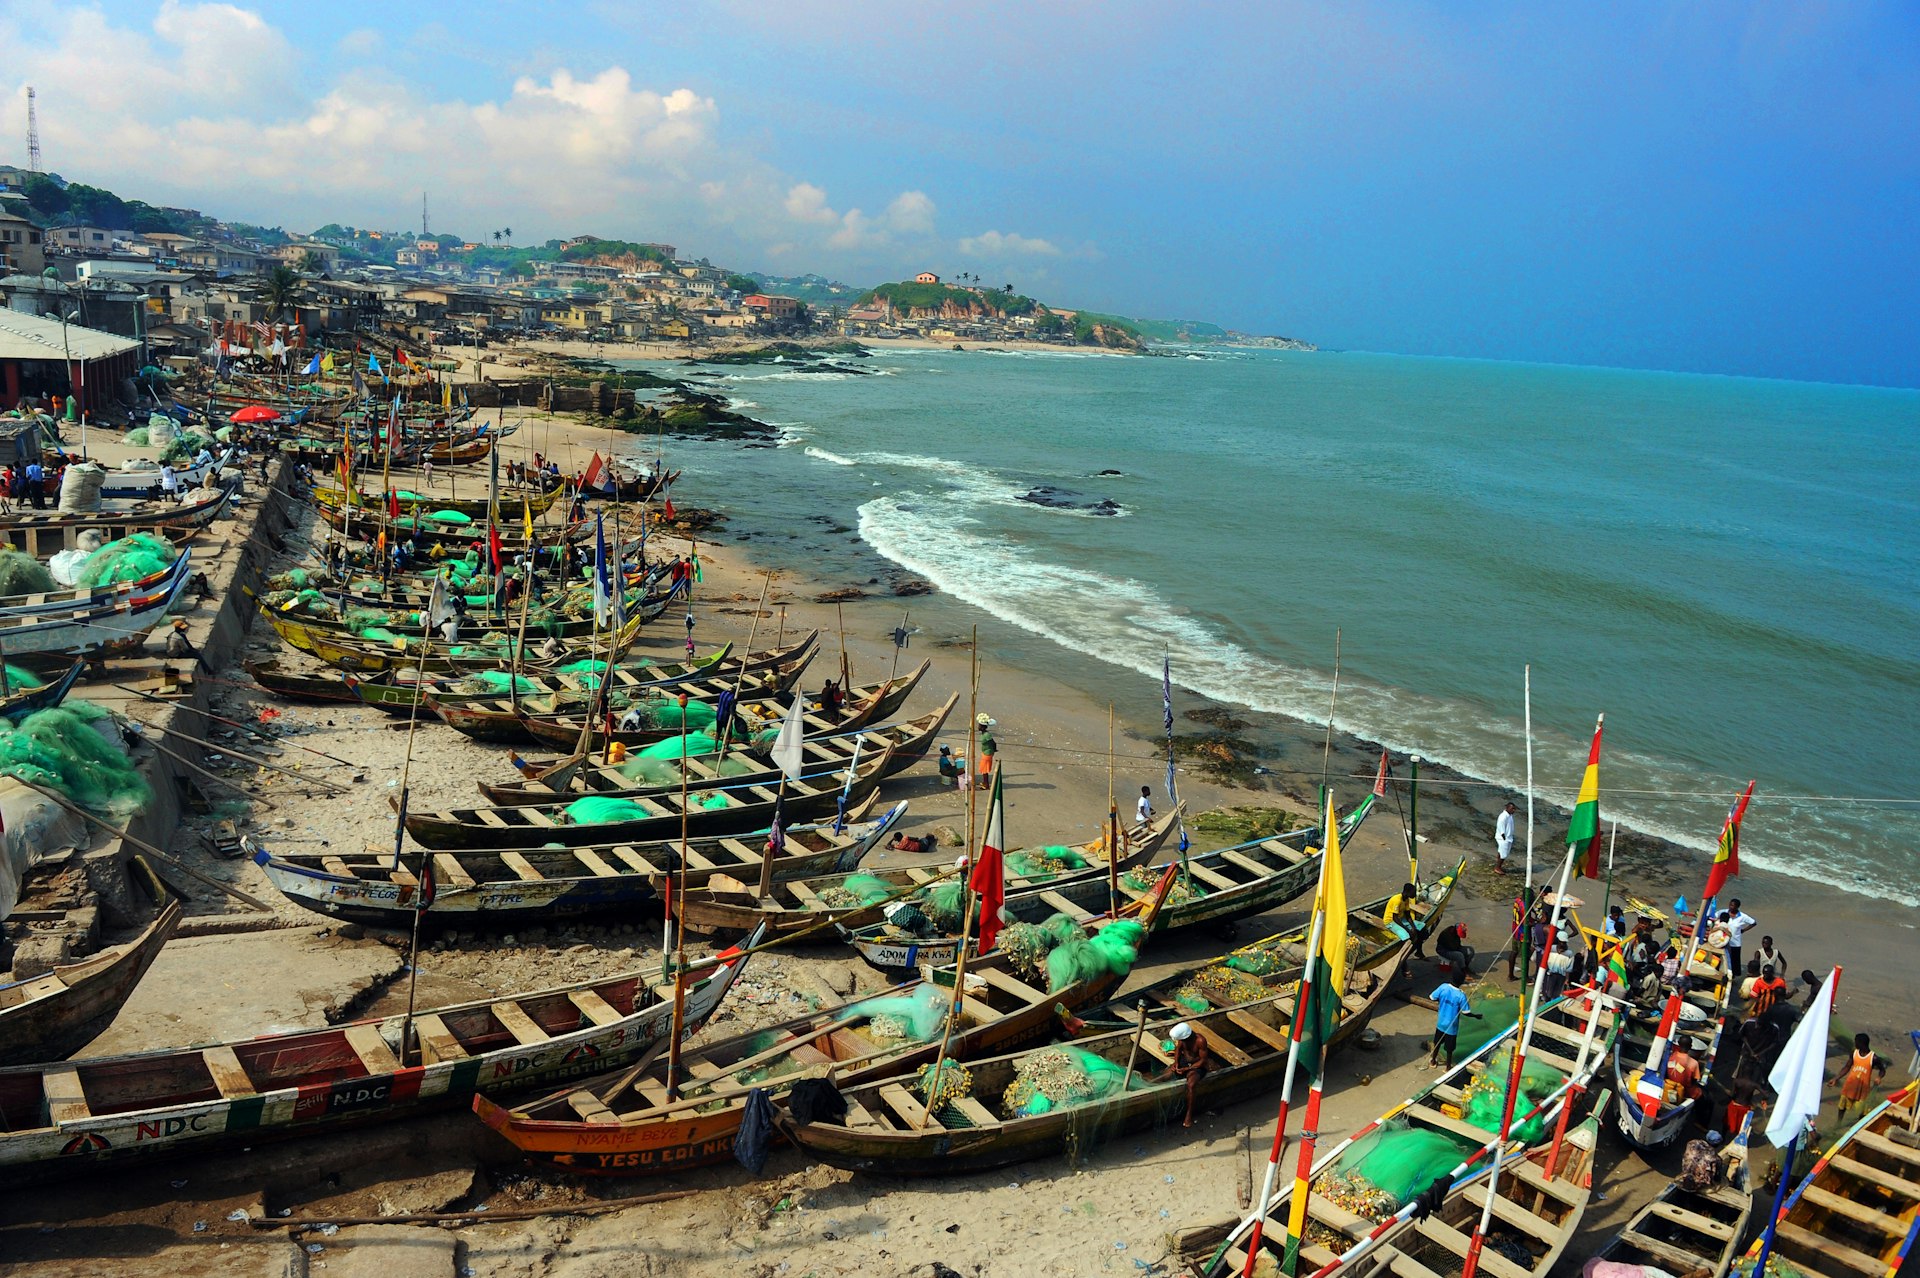 Wooden fishing boats with colorful flags dominate a sandy beach